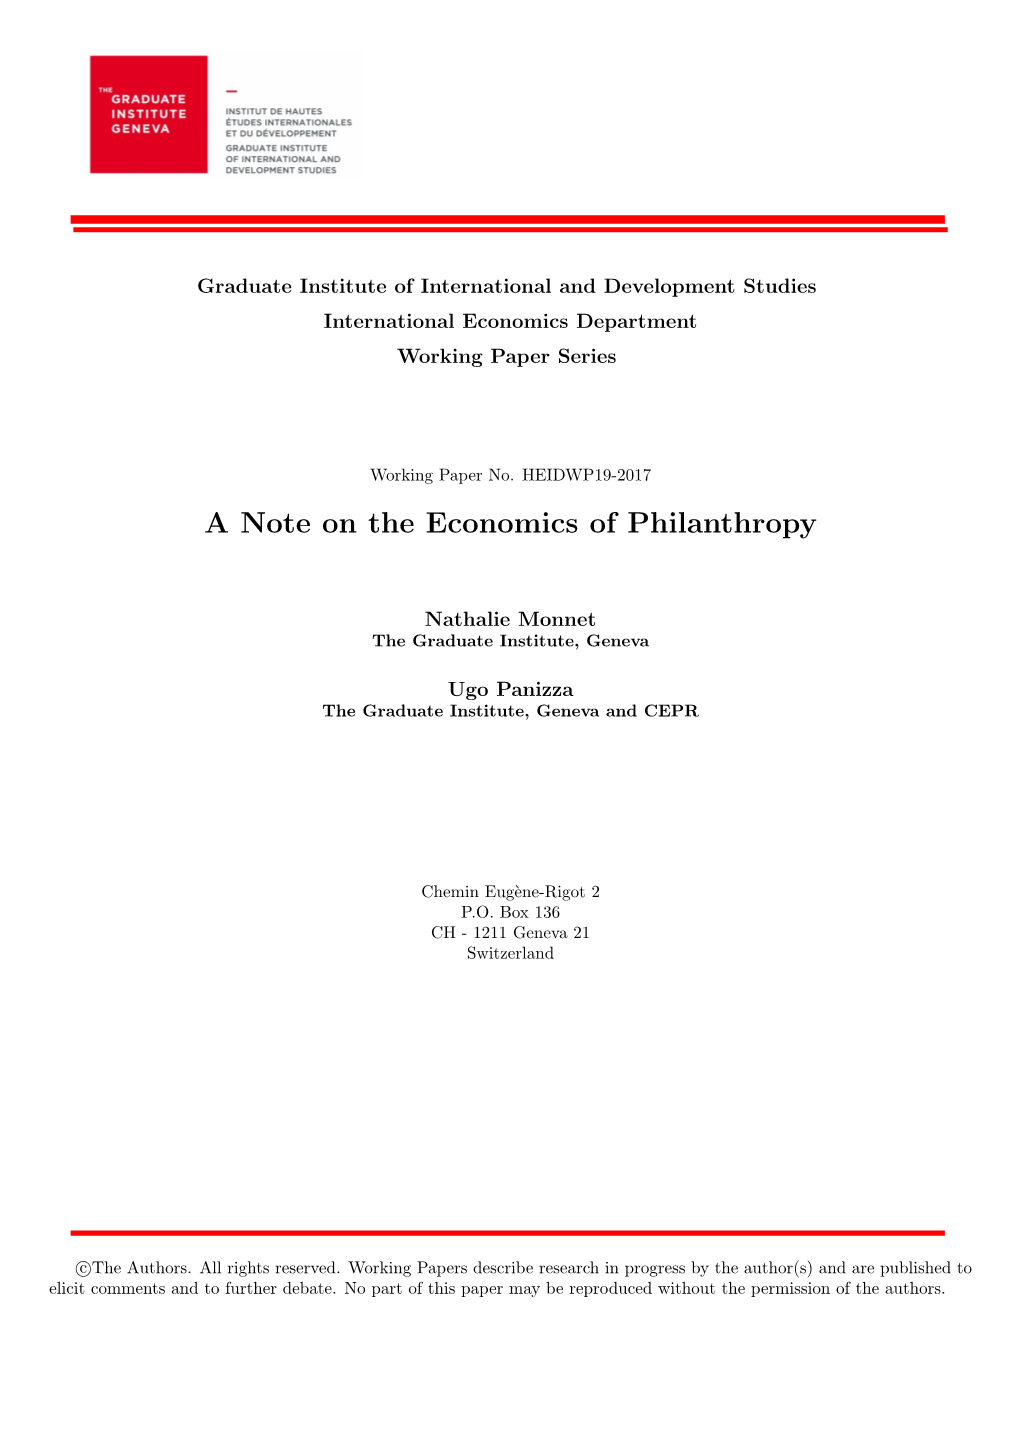 A Note on the Economics of Philanthropy